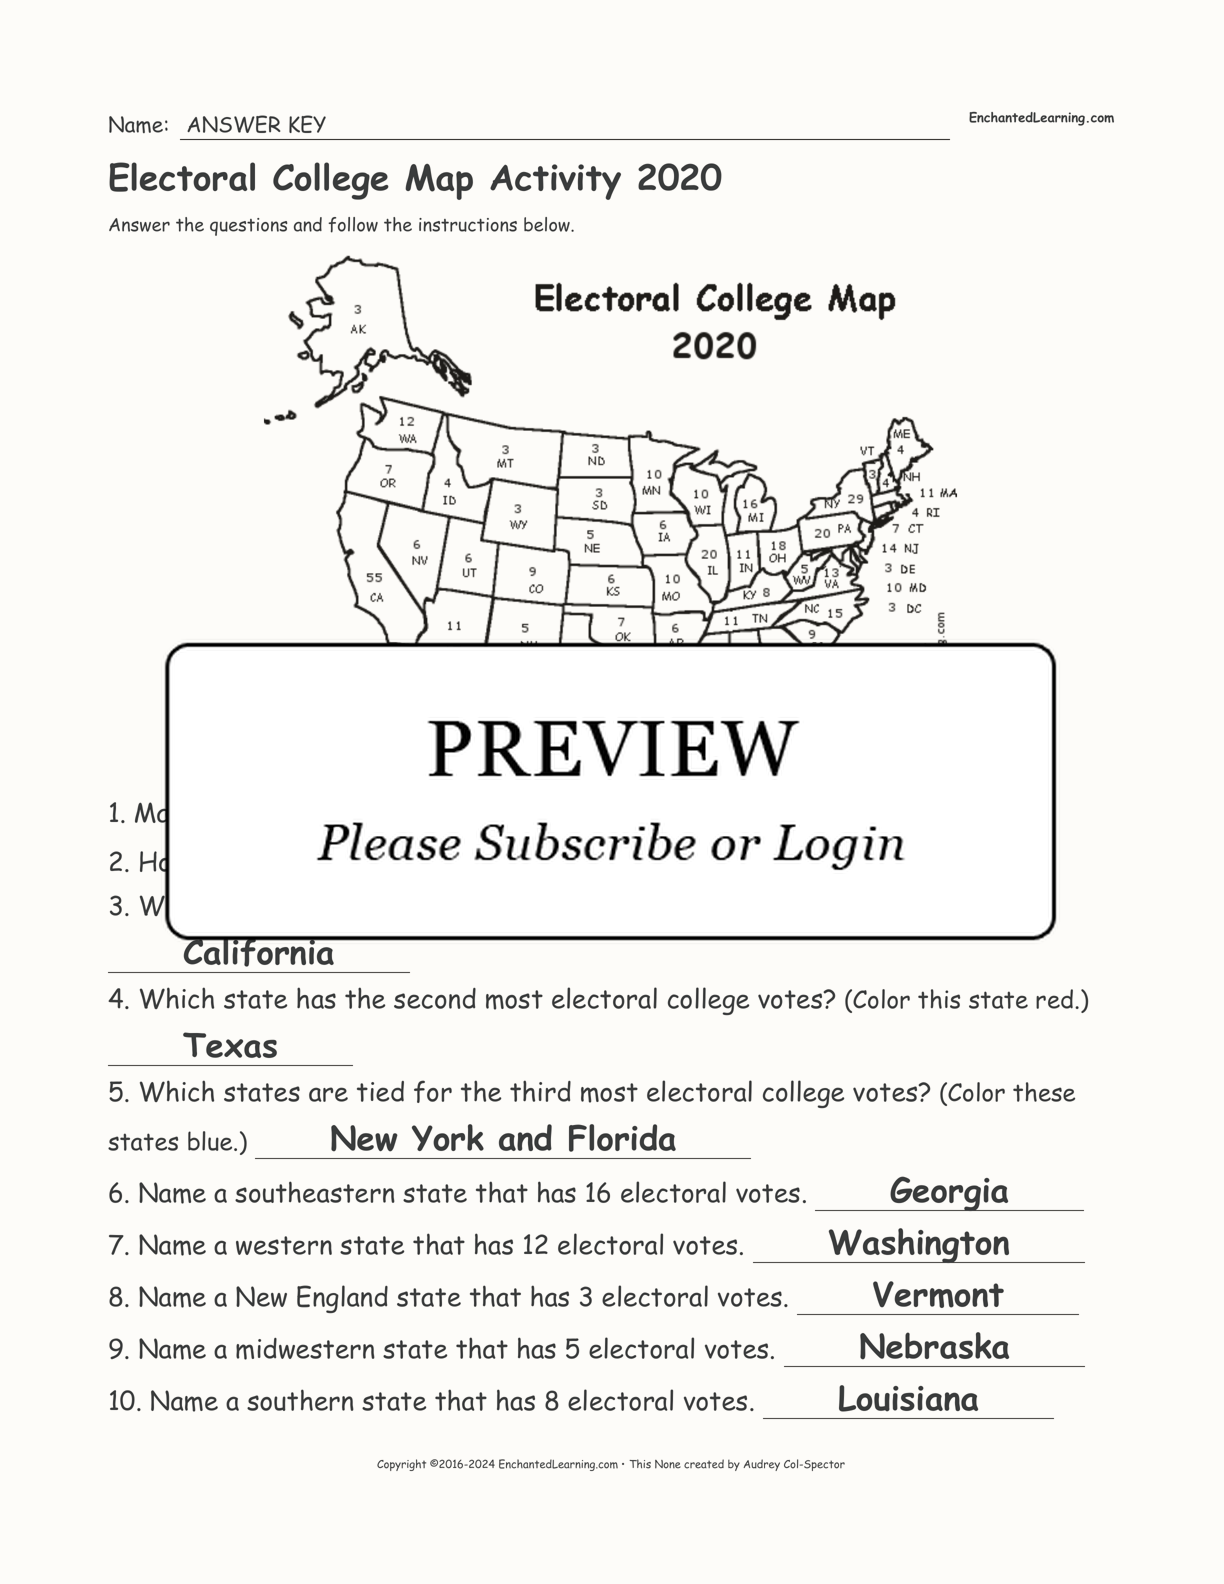 Electoral College Map Activity 2020 interactive worksheet page 2